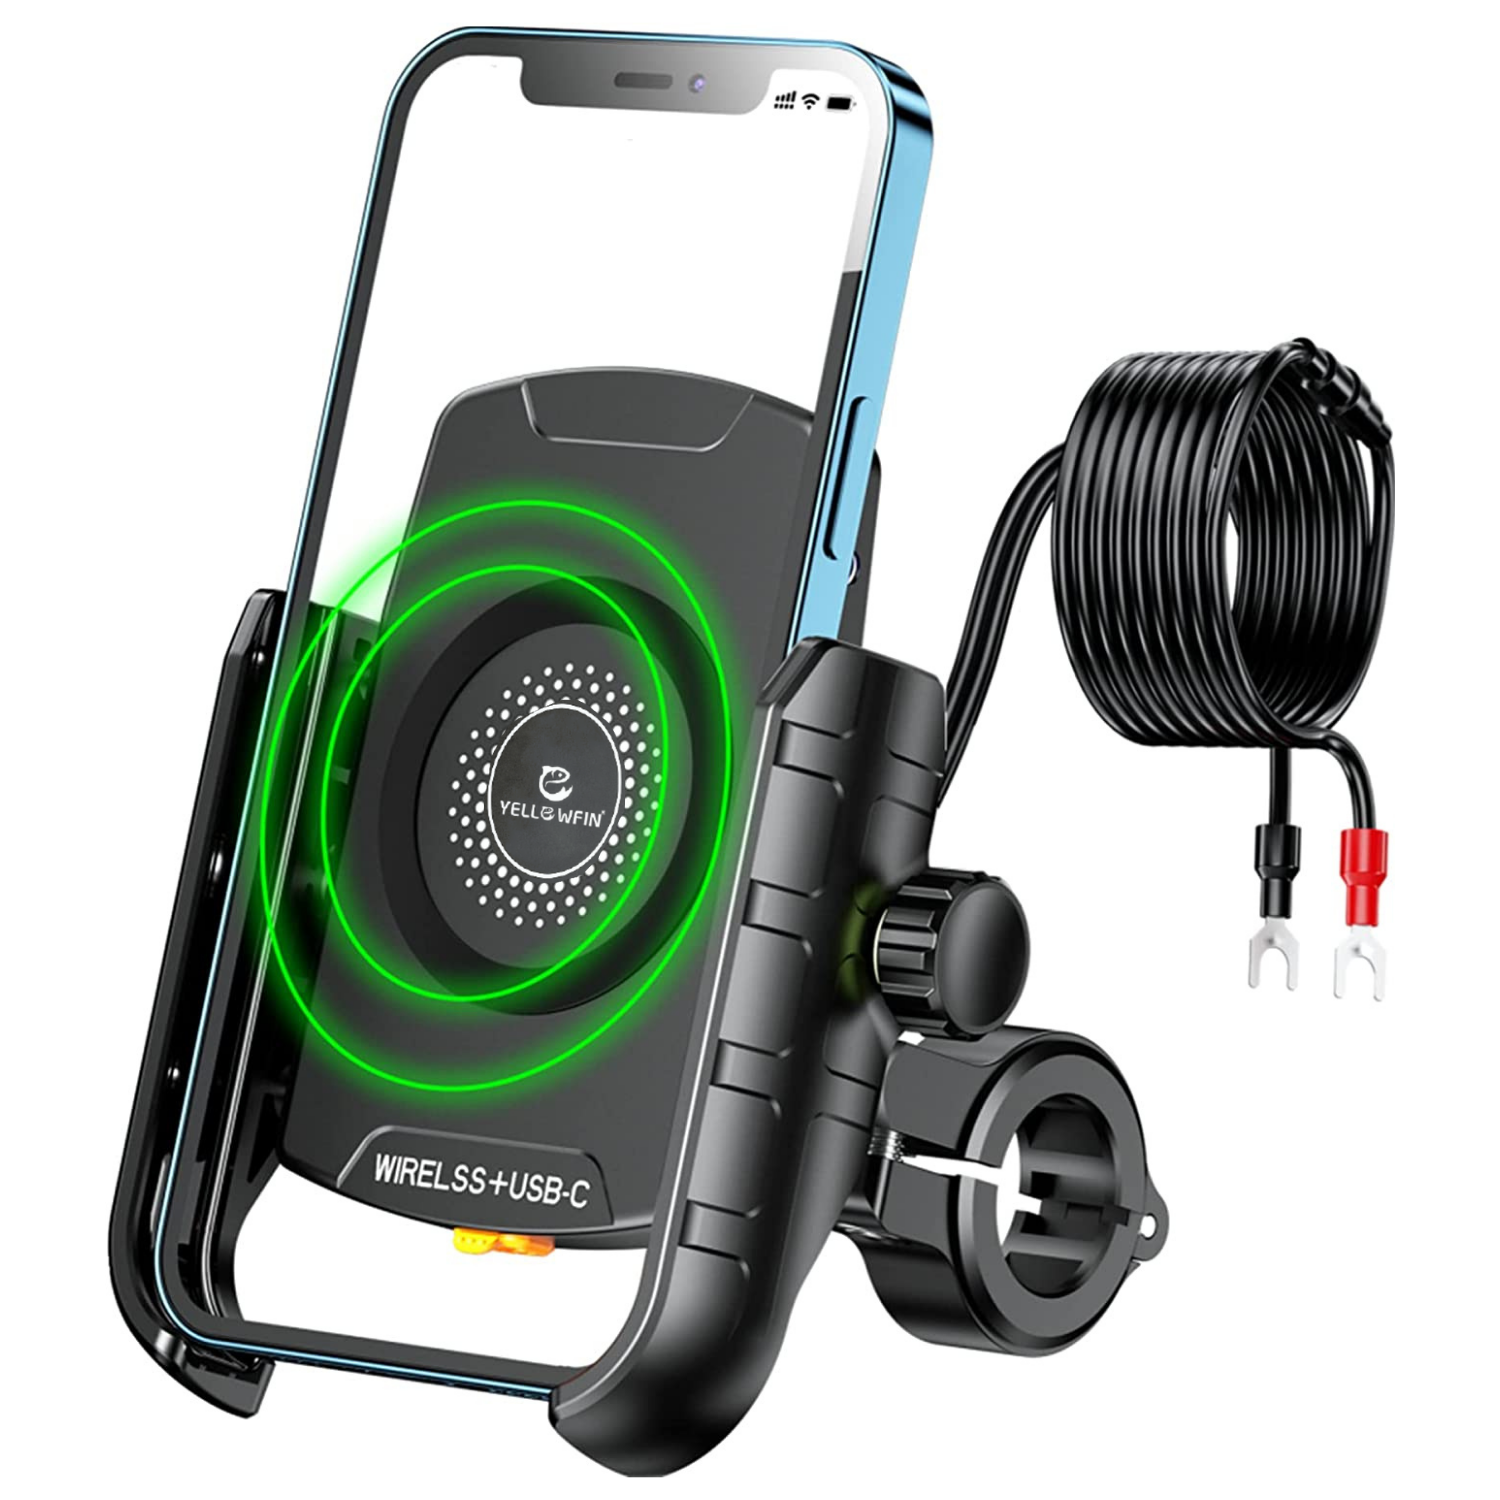 Jaw Grip Waterproof Bike | Motorcycle | Scooter Mobile Phone Holder Mount with 360° Rotation | Fast 15 W Wireless & 20 W USB-C Charger